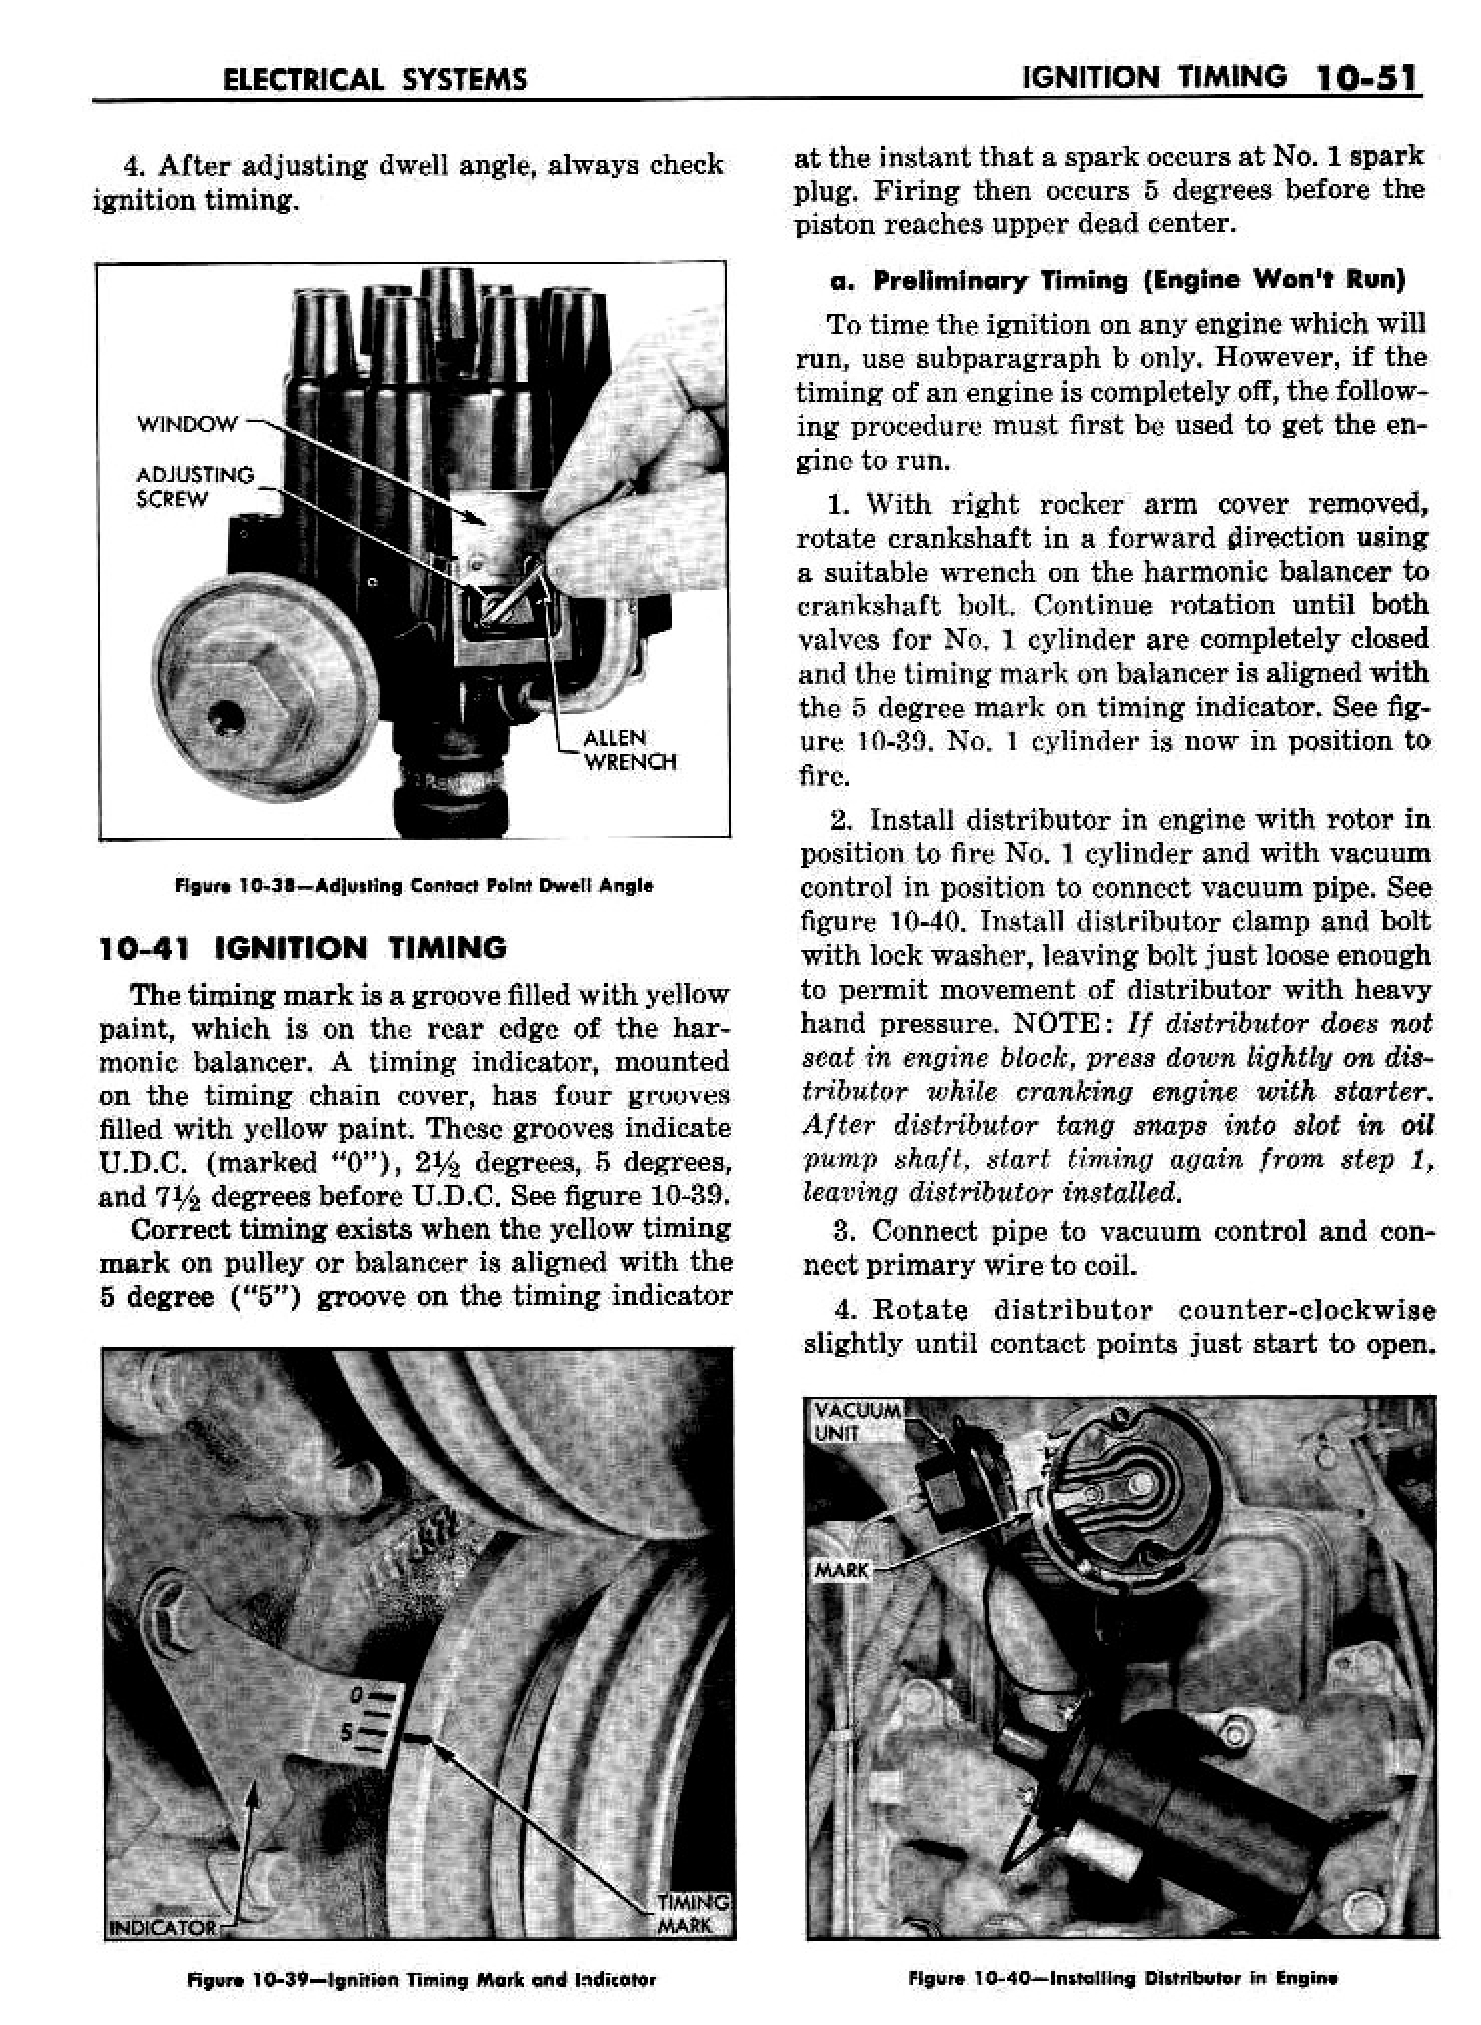 n_11 1958 Buick Shop Manual - Electrical Systems_51.jpg